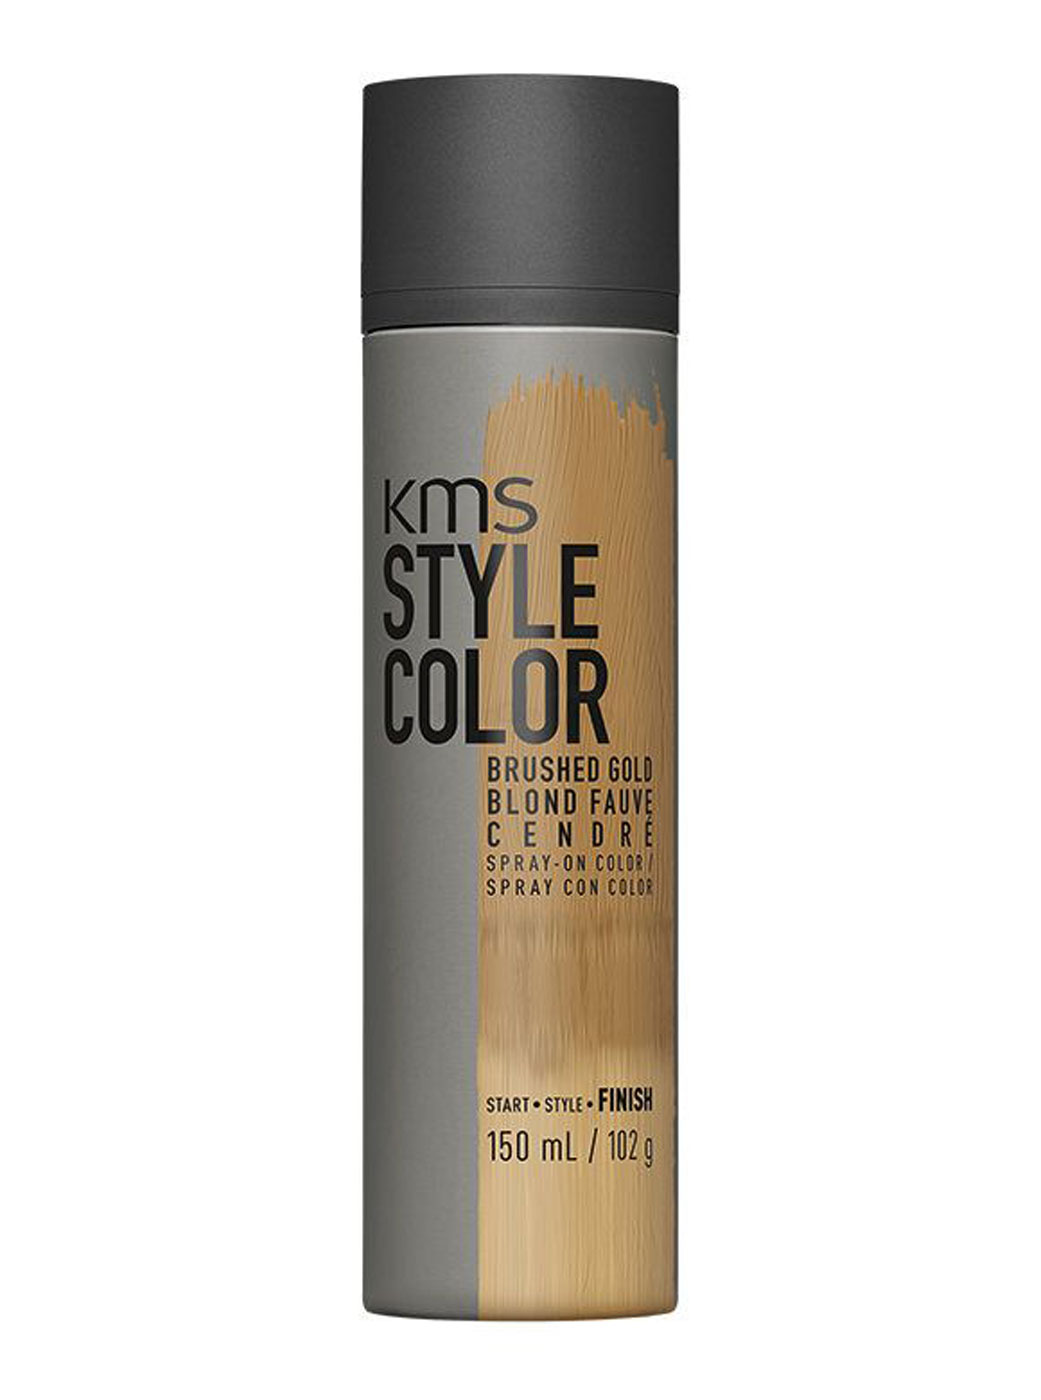 KMS Style Color Brushed Gold Finish temporäres Farbspray Haarfarbe 150ml